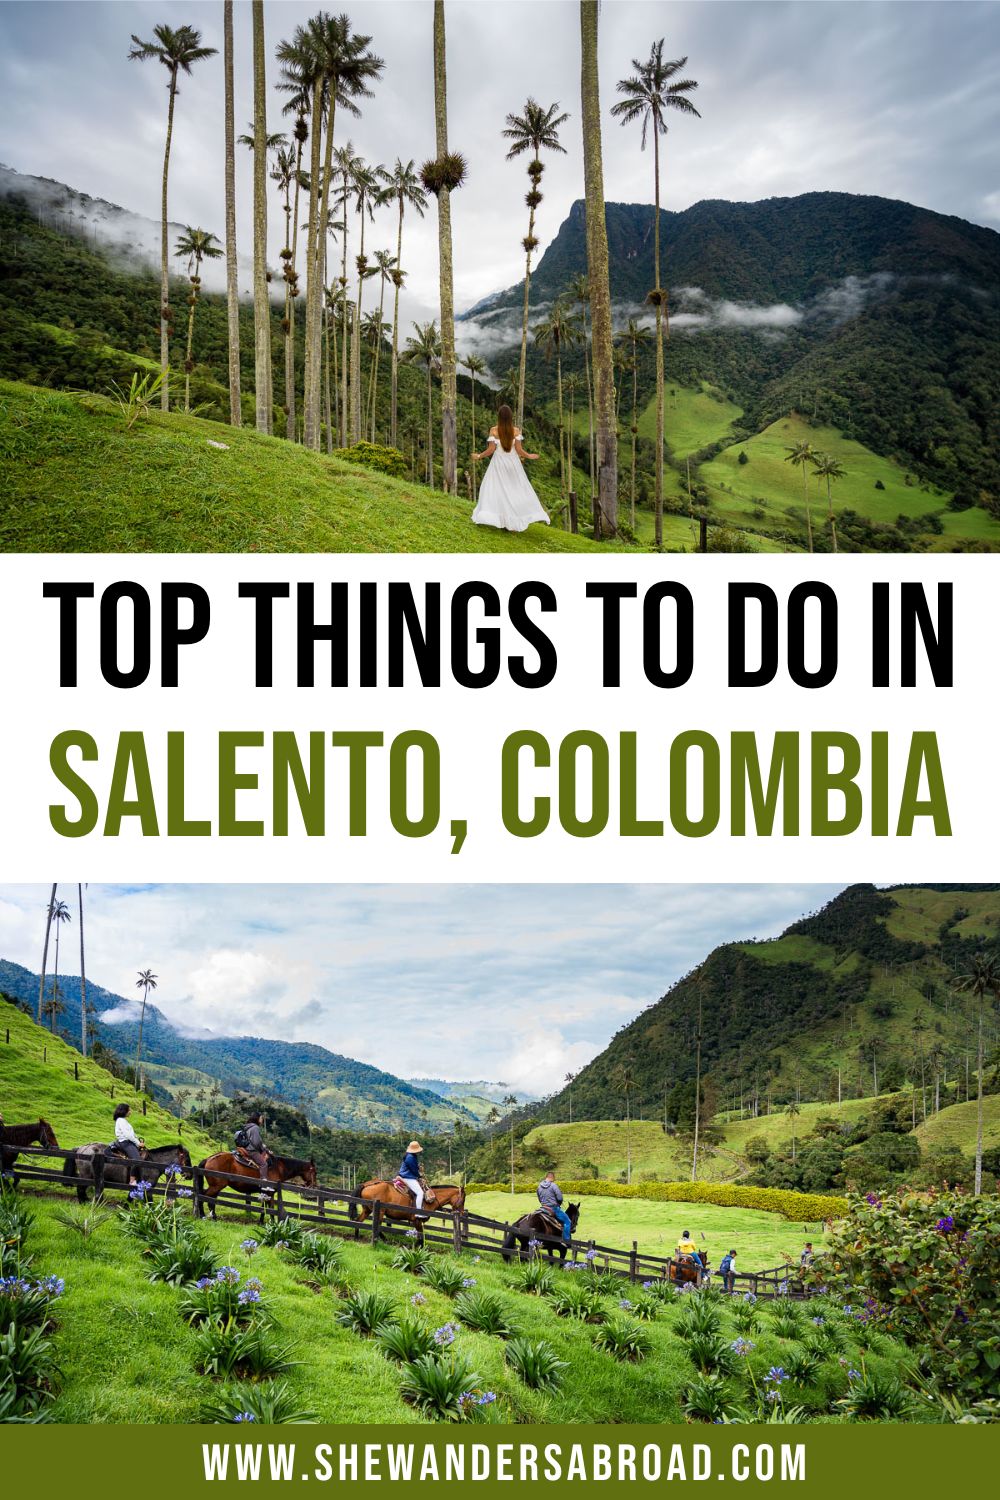 10 Unmissable Things to Do in Salento, Colombia (+ Tips for Visiting)